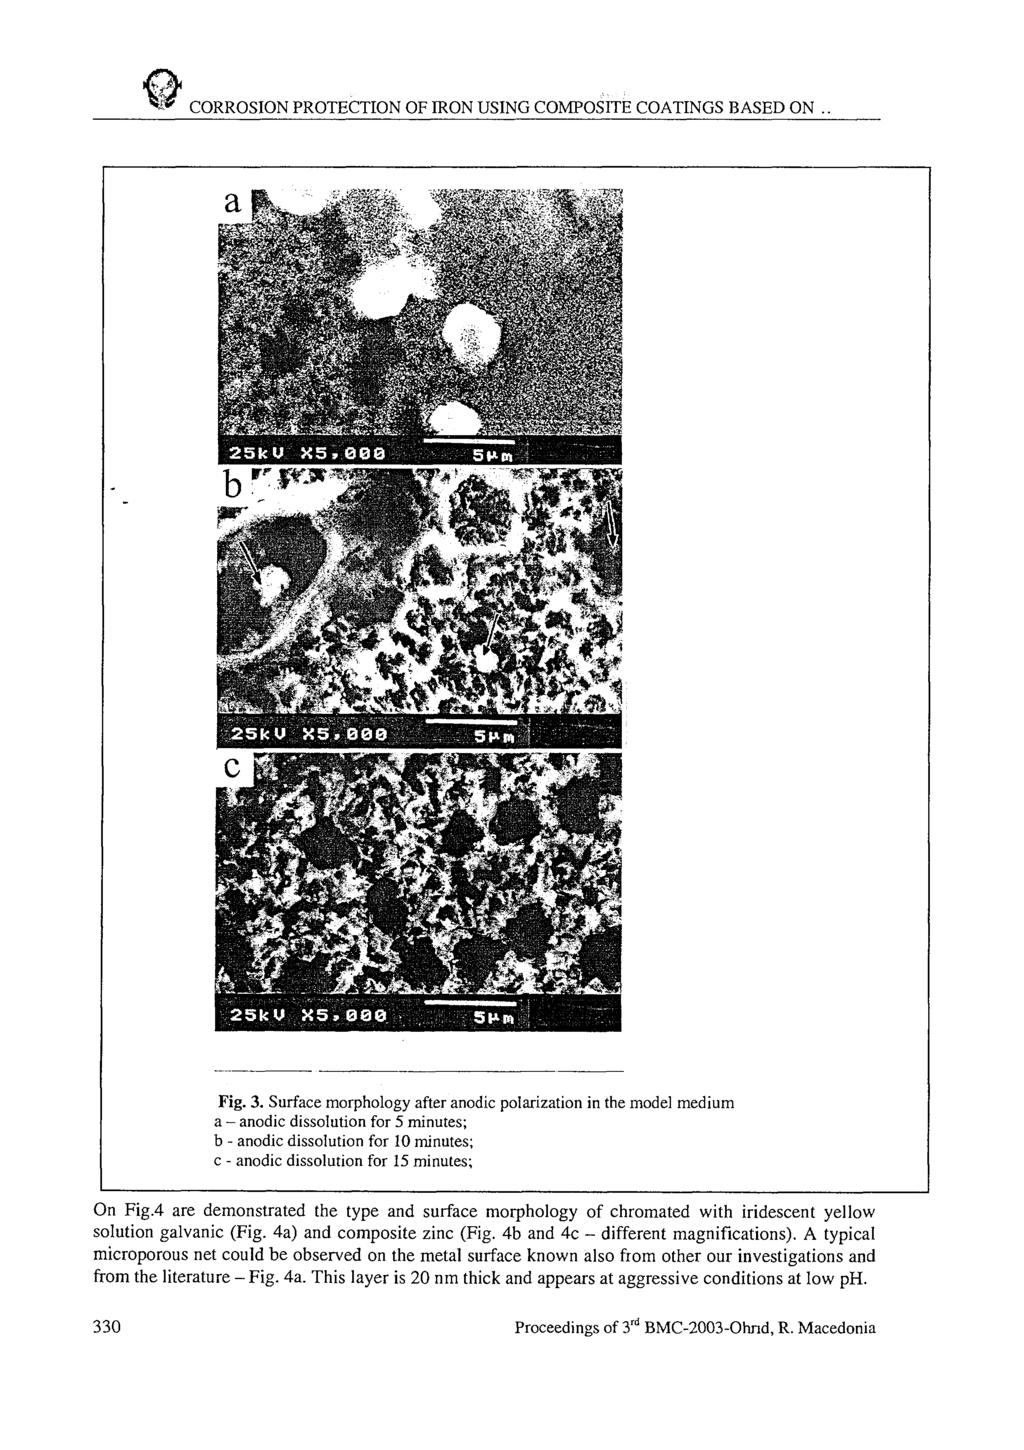 CORROSION PROTECTION OF IRON USING COMPOSITE COATINGS BASED ON Fig. 3.